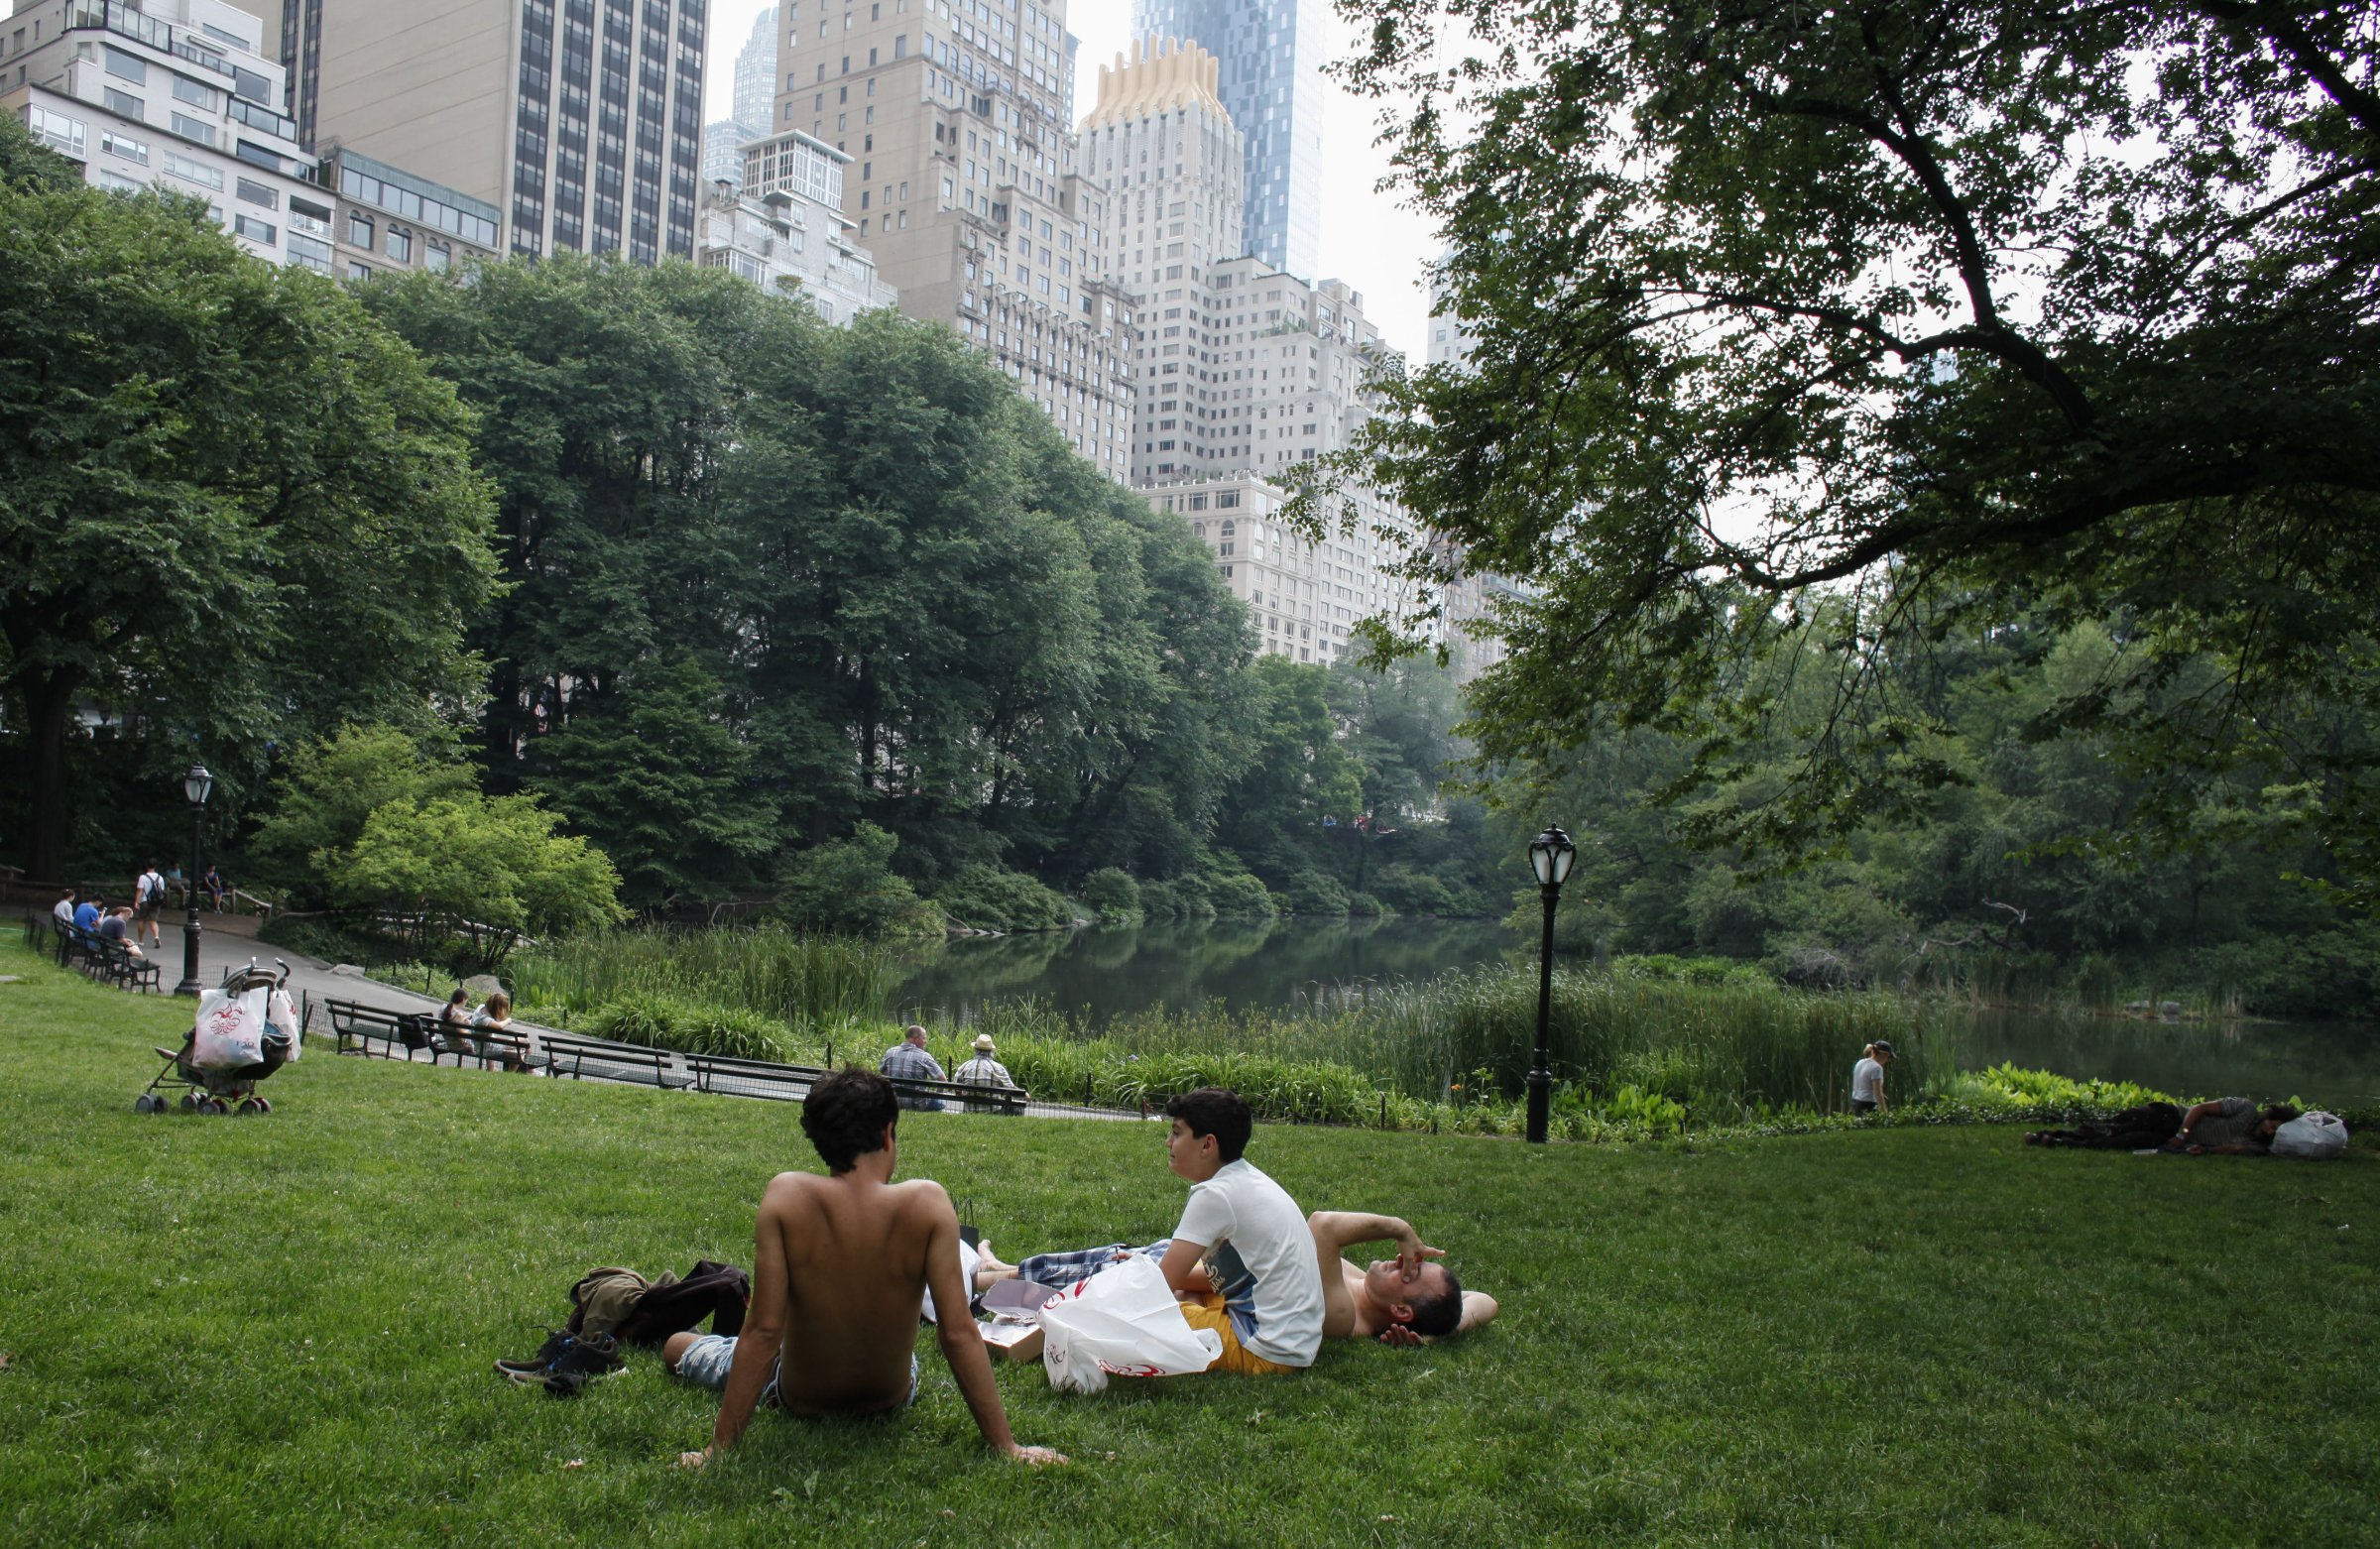 People gather in in Central Park as temperatures in Manhattan hit 90 degrees F (32C) for the first time in 2015, in New York City on June 11, 2015.